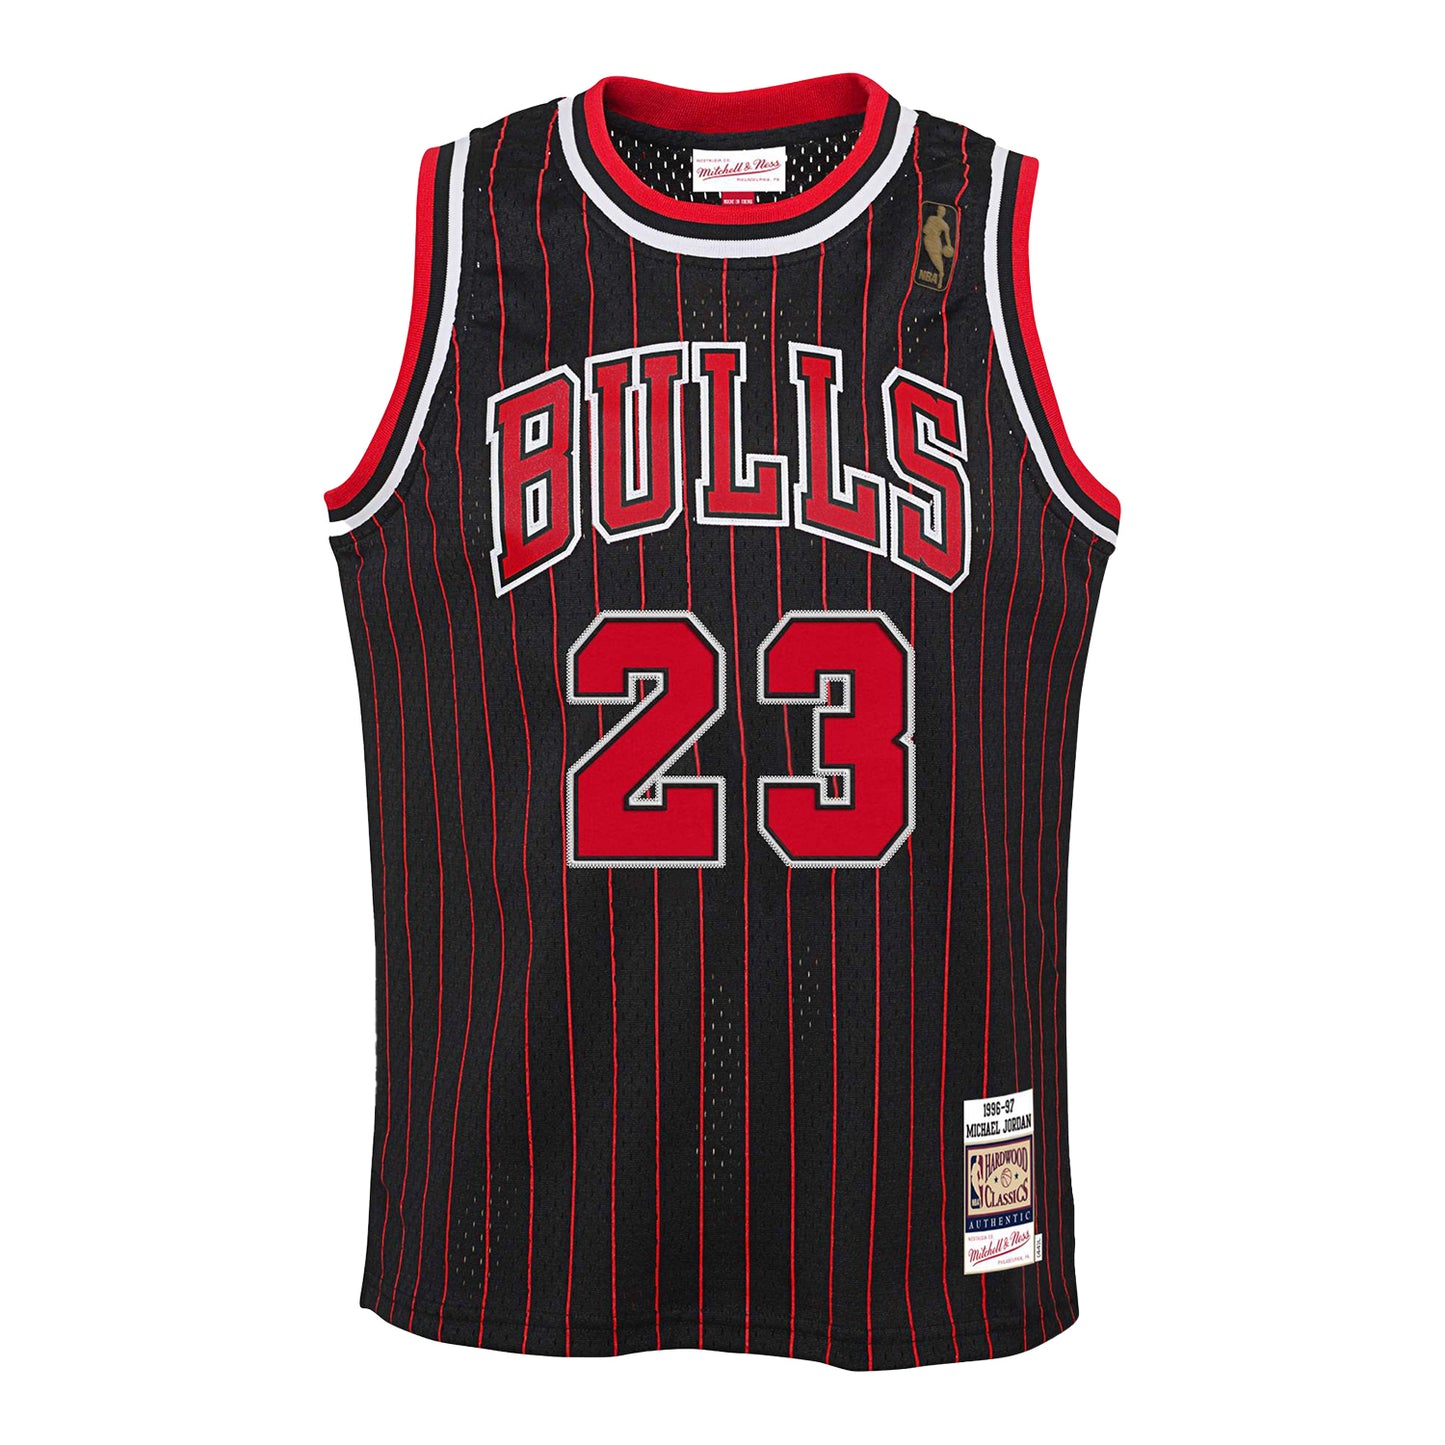 Youth Chicago Bulls Authentic Mitchell & Ness Michael Jordan 1996-97 Jersey in black - front view